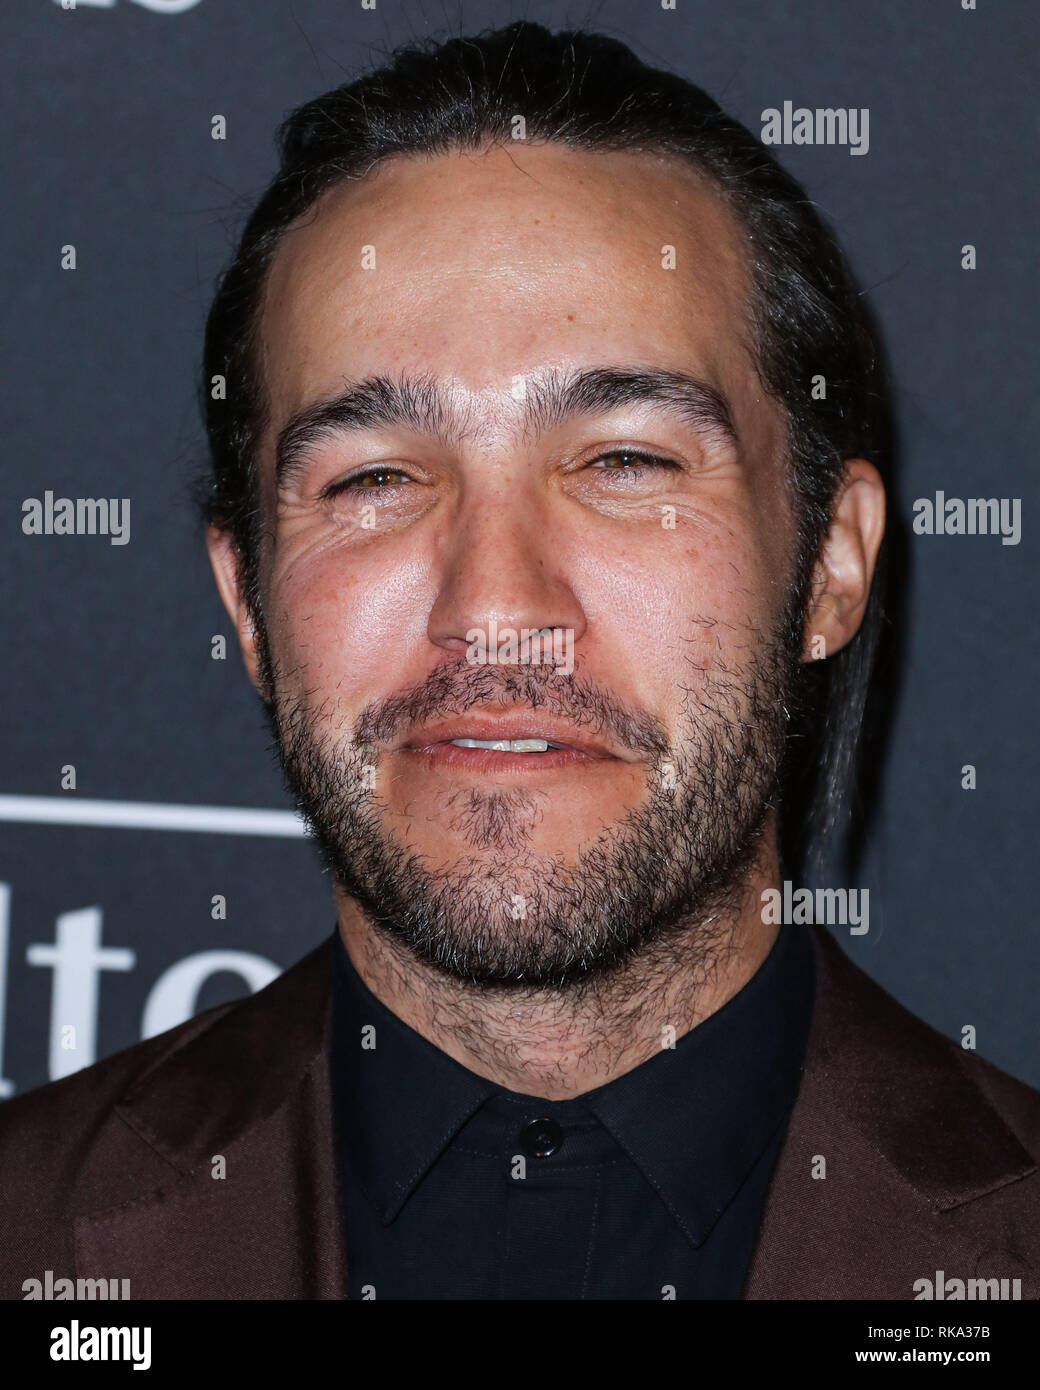 California, USA. 9th Feb 2019.  Singer Pete Wentz of Fall Out Boy wearing an Ermenegildo Zegna suit, a The Kooples shirt, and To Boot shoes arrives at The Recording Academy And Clive Davis' 2019 Pre-GRAMMY Gala held at The Beverly Hilton Hotel on February 9, 2019 in Beverly Hills, Los Angeles, California, United States. (Photo by Xavier Collin/Image Press Agency) Credit: Image Press Agency/Alamy Live News Stock Photo